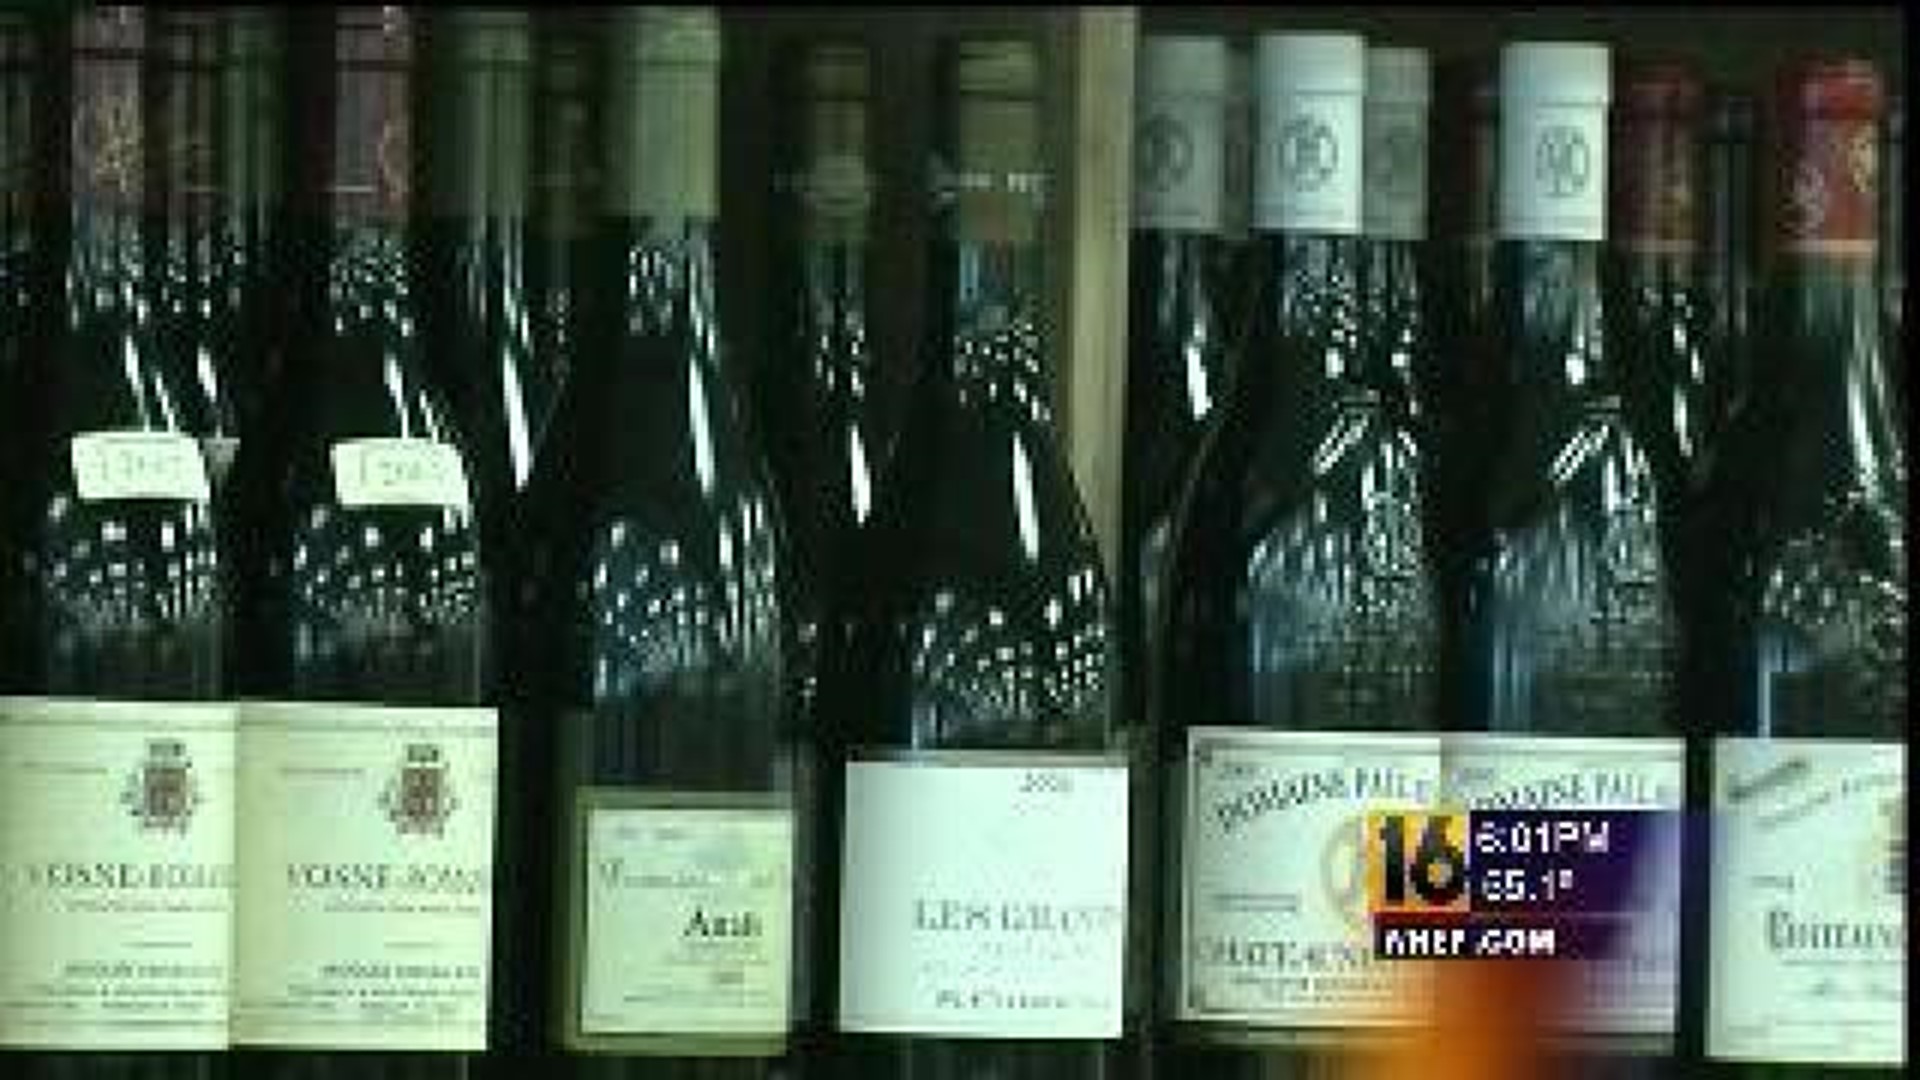 People React to Governor's Plan to Privatize State Liquor Sales